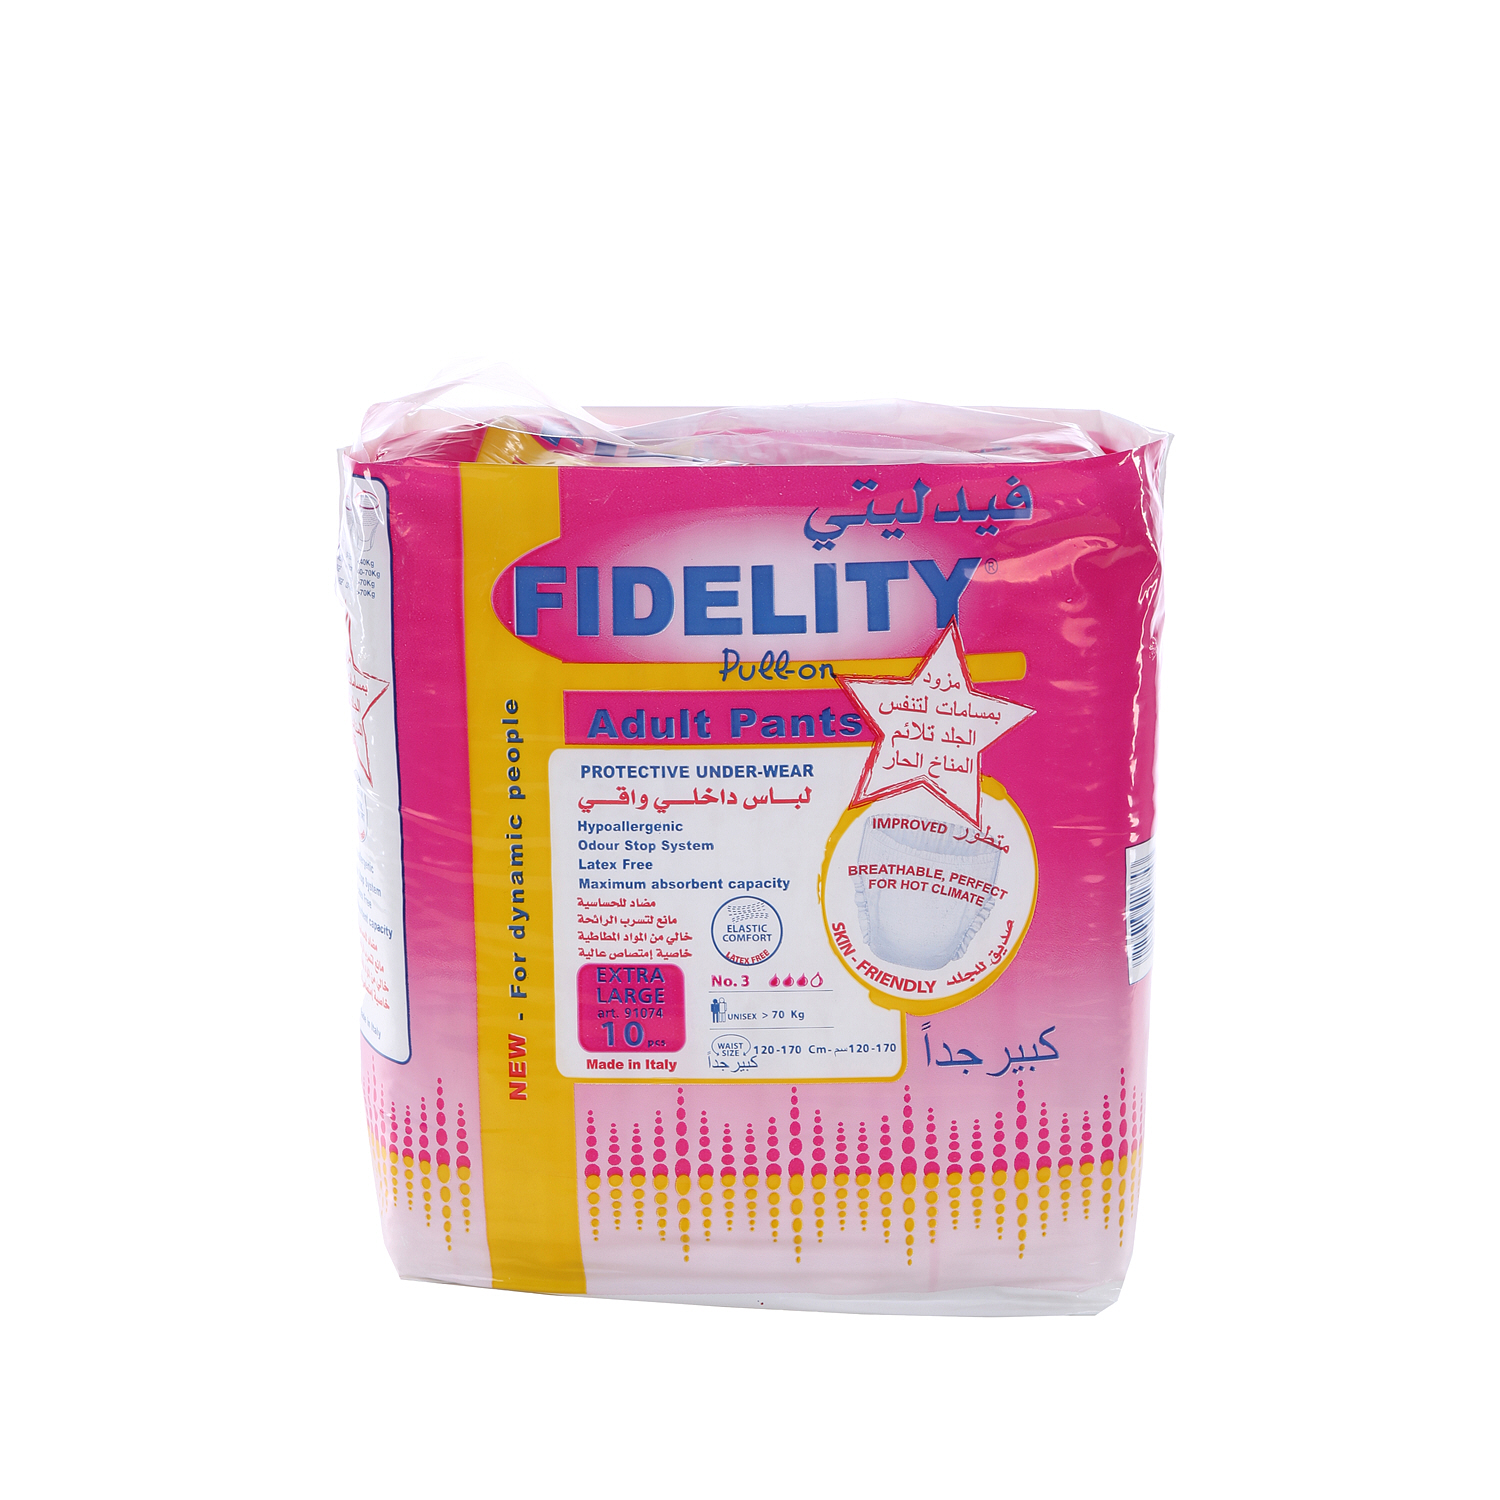 Fidelity Adult Pull On Pants Extra Large 10 Diaper